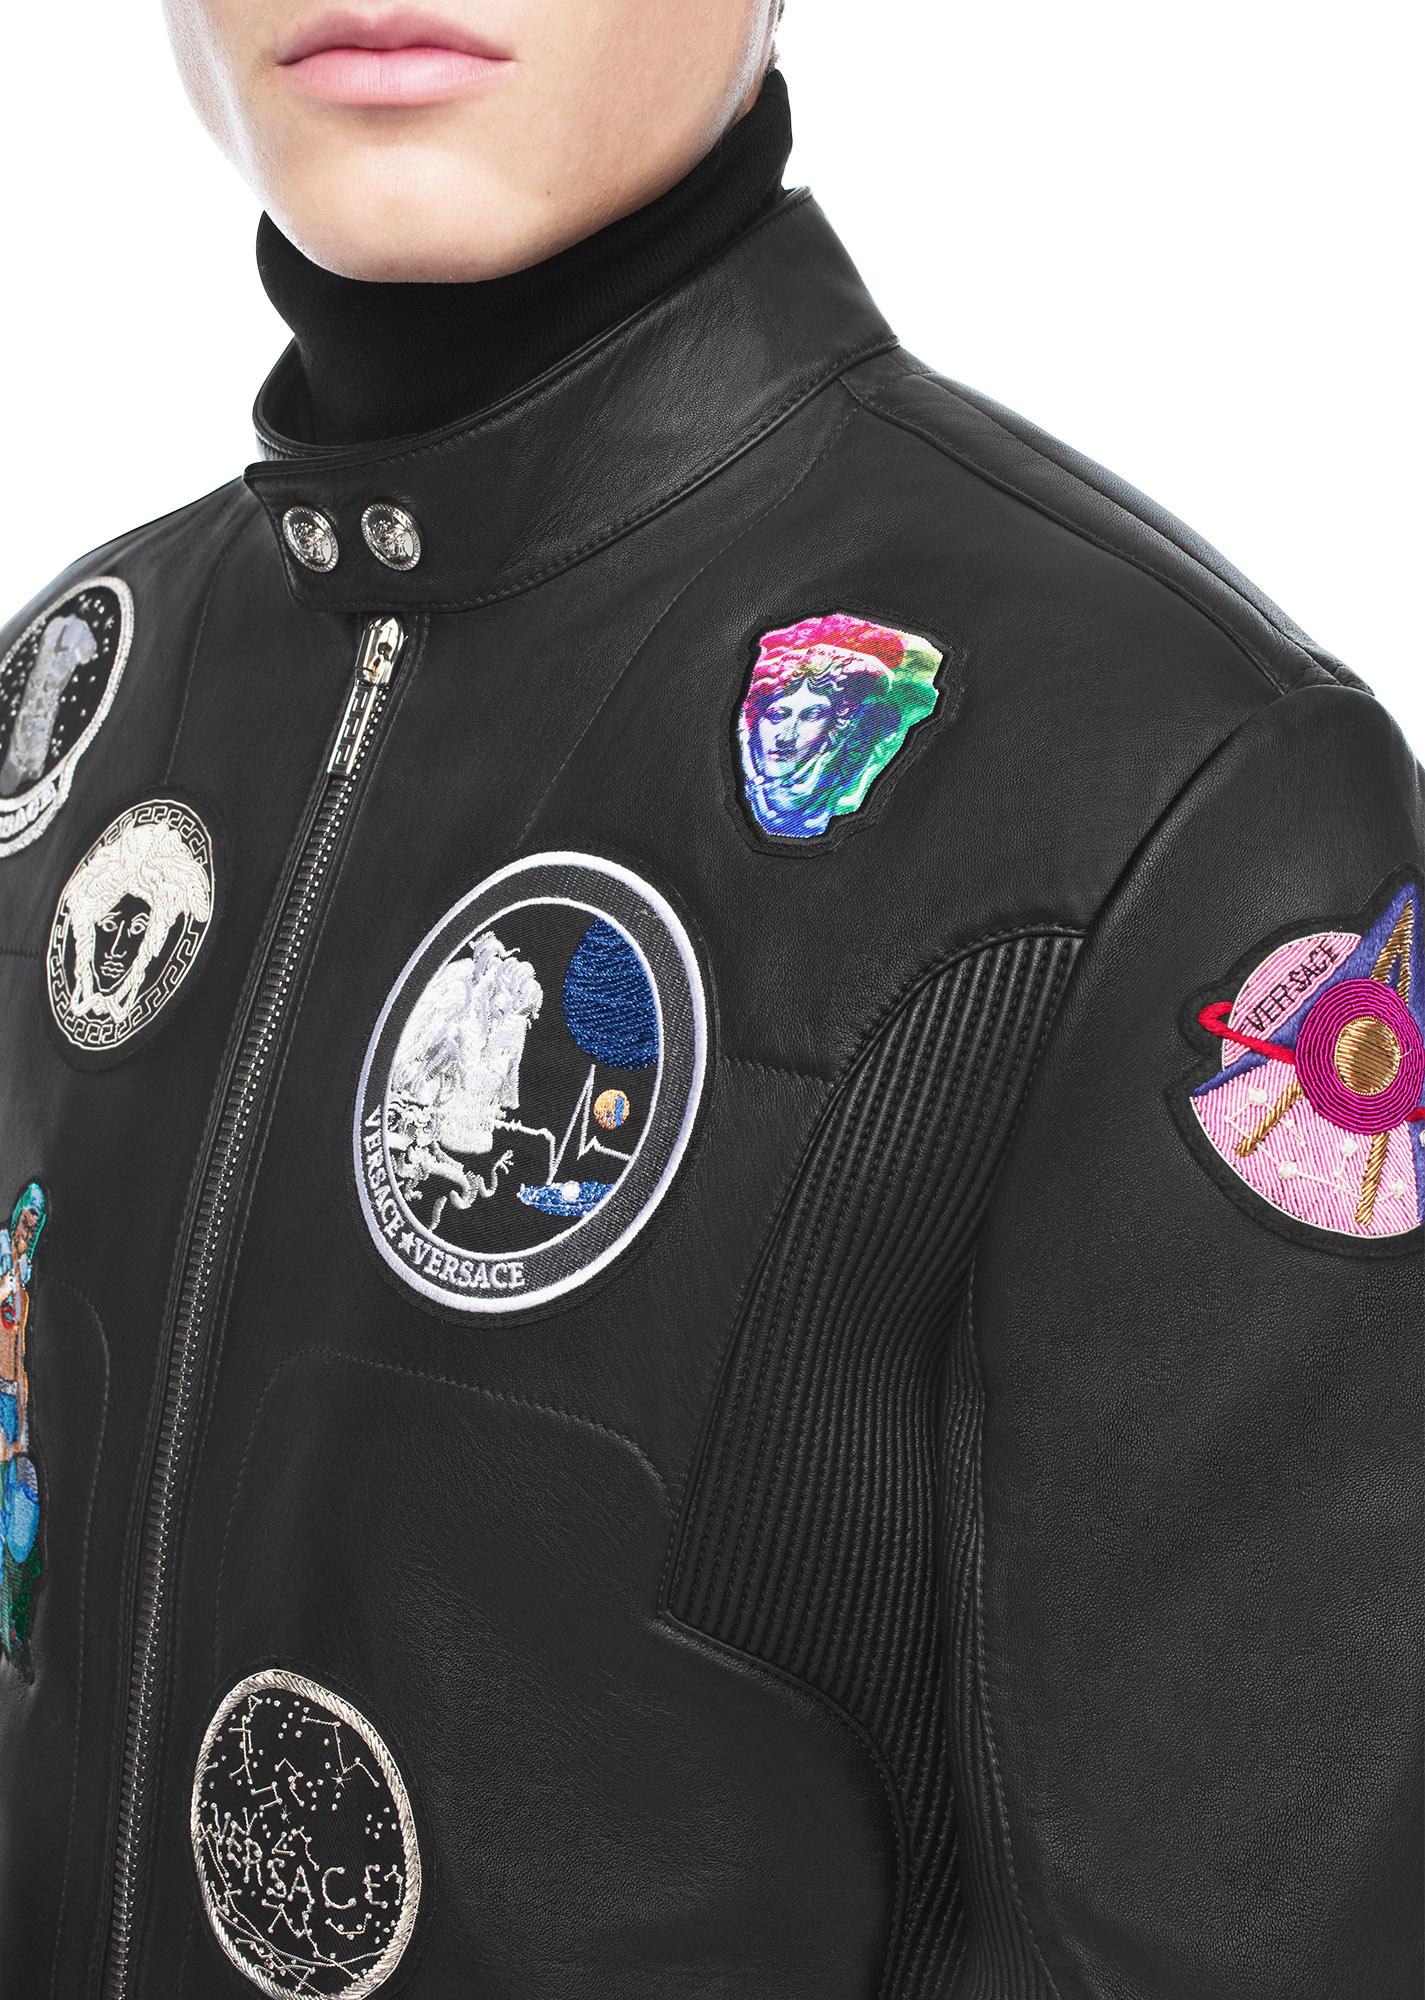 Versace Astronaut Patch Lamb Leather Jacket 
Retail value $7950 / 5900 EUR. 
Long sleeved, biker jacket embellished with astronaut patches. 
Has a central zip closure.

IT Size 58 - US 48

New, with tags